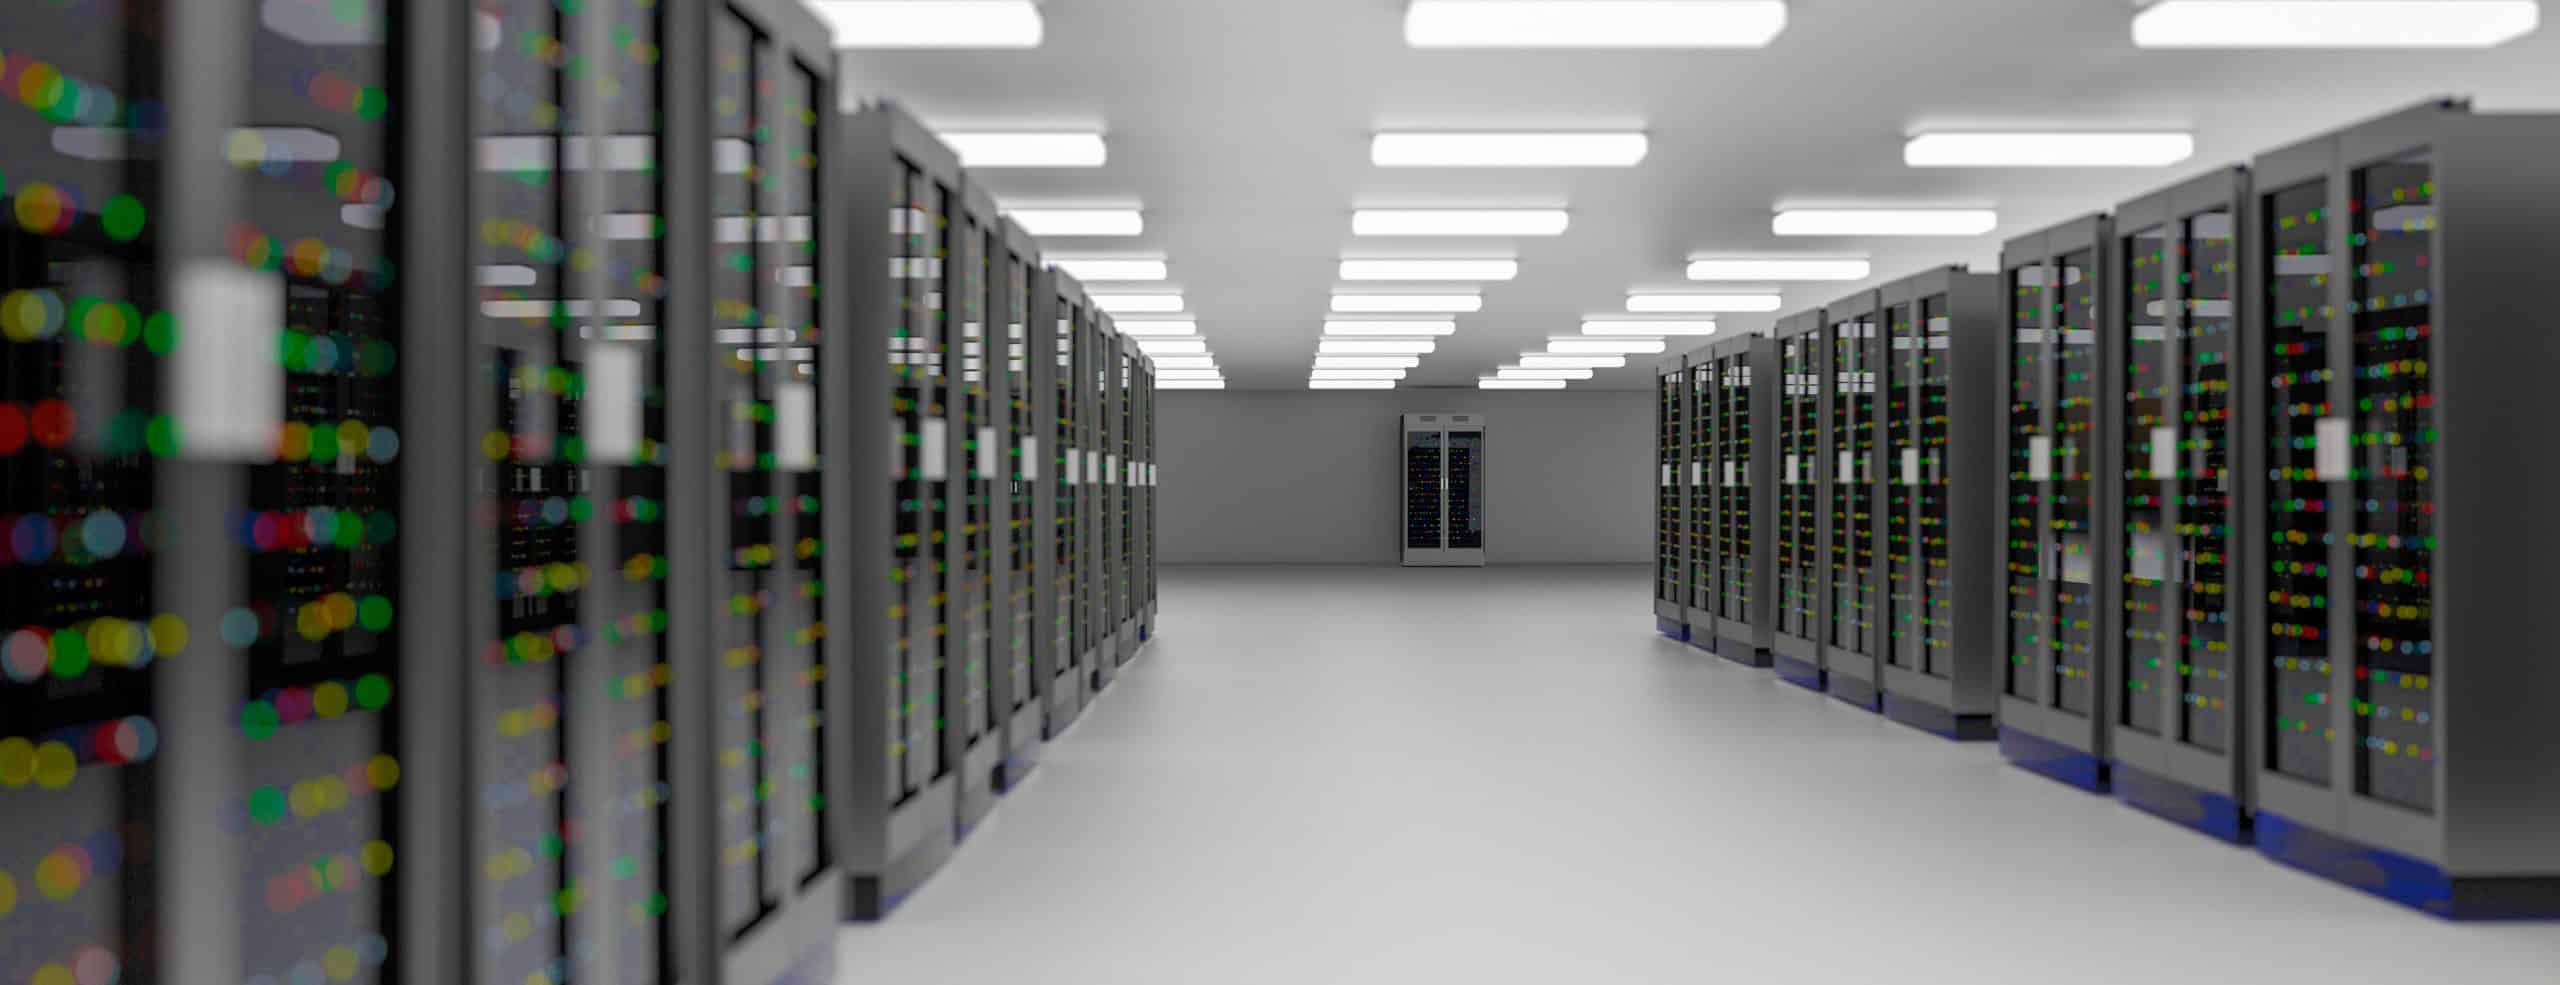 3. Data Centers scaled